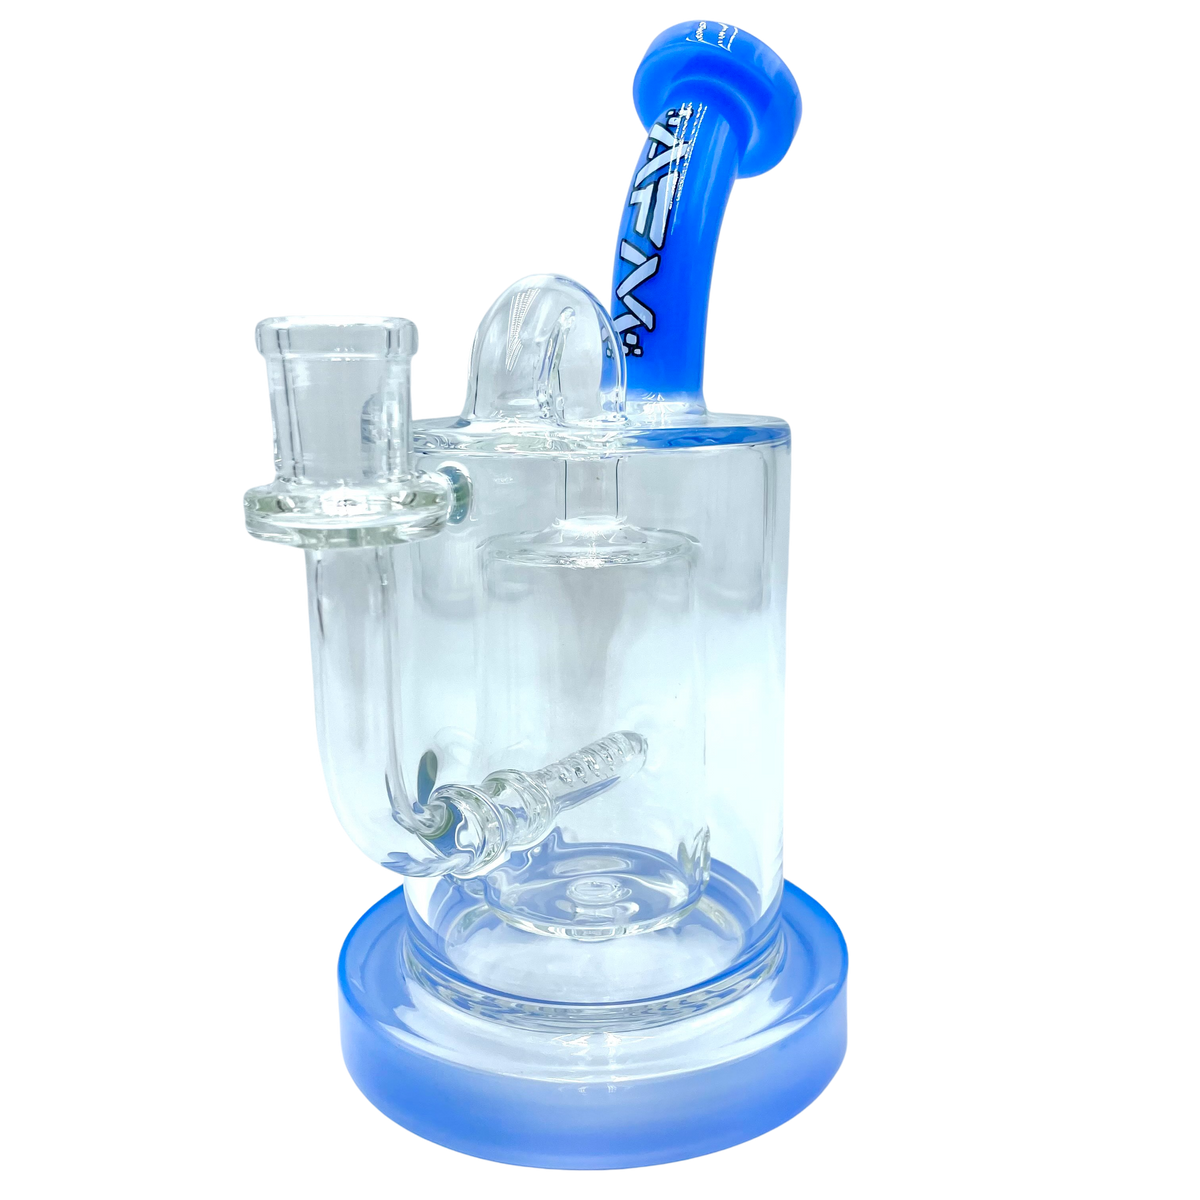 8" Pump Color Glass Recycler Dab Rig